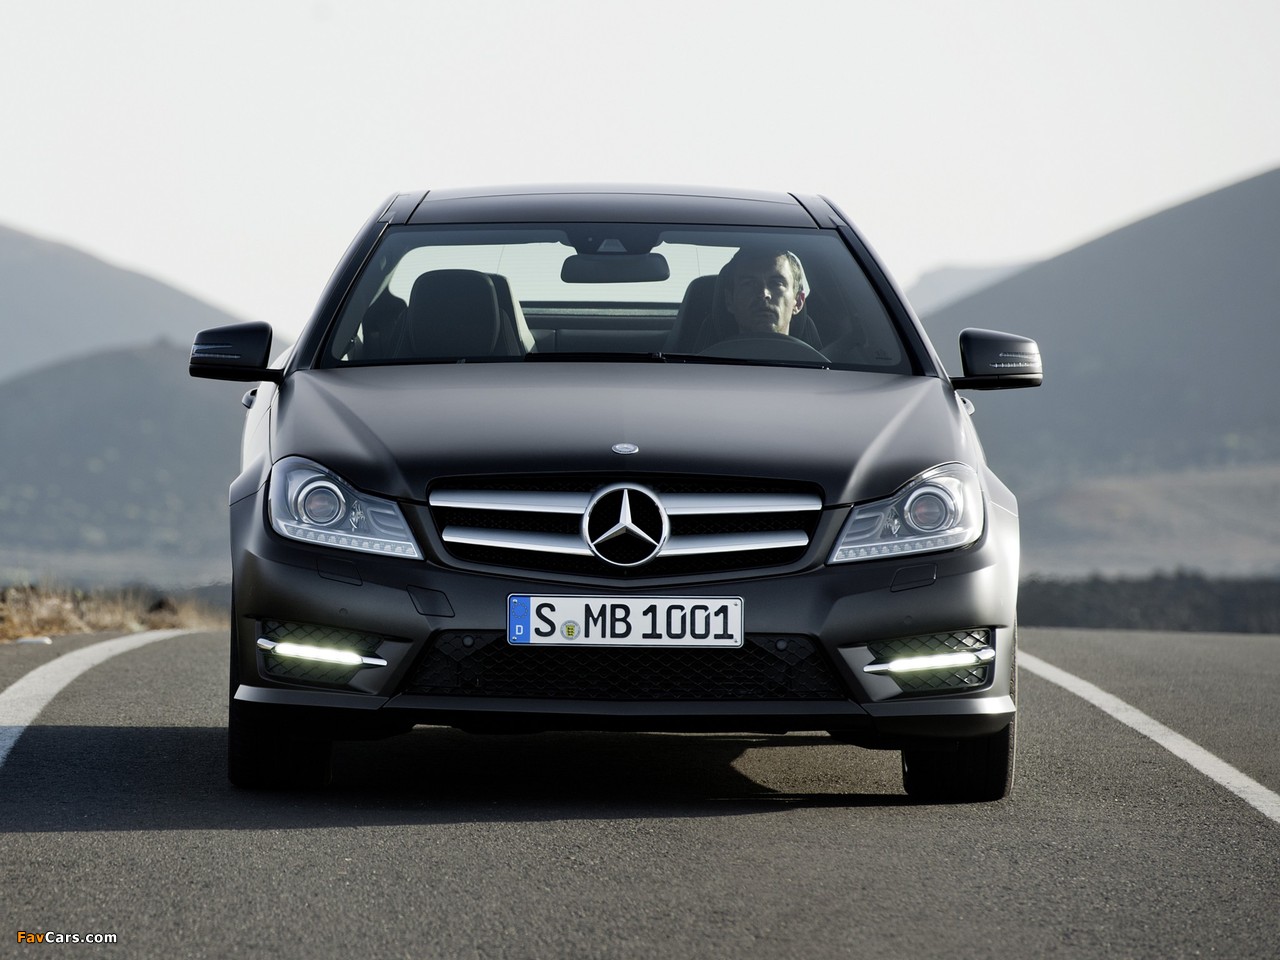 Mercedes-Benz C 250 CDI Coupe (C204) 2011 pictures (1280 x 960)